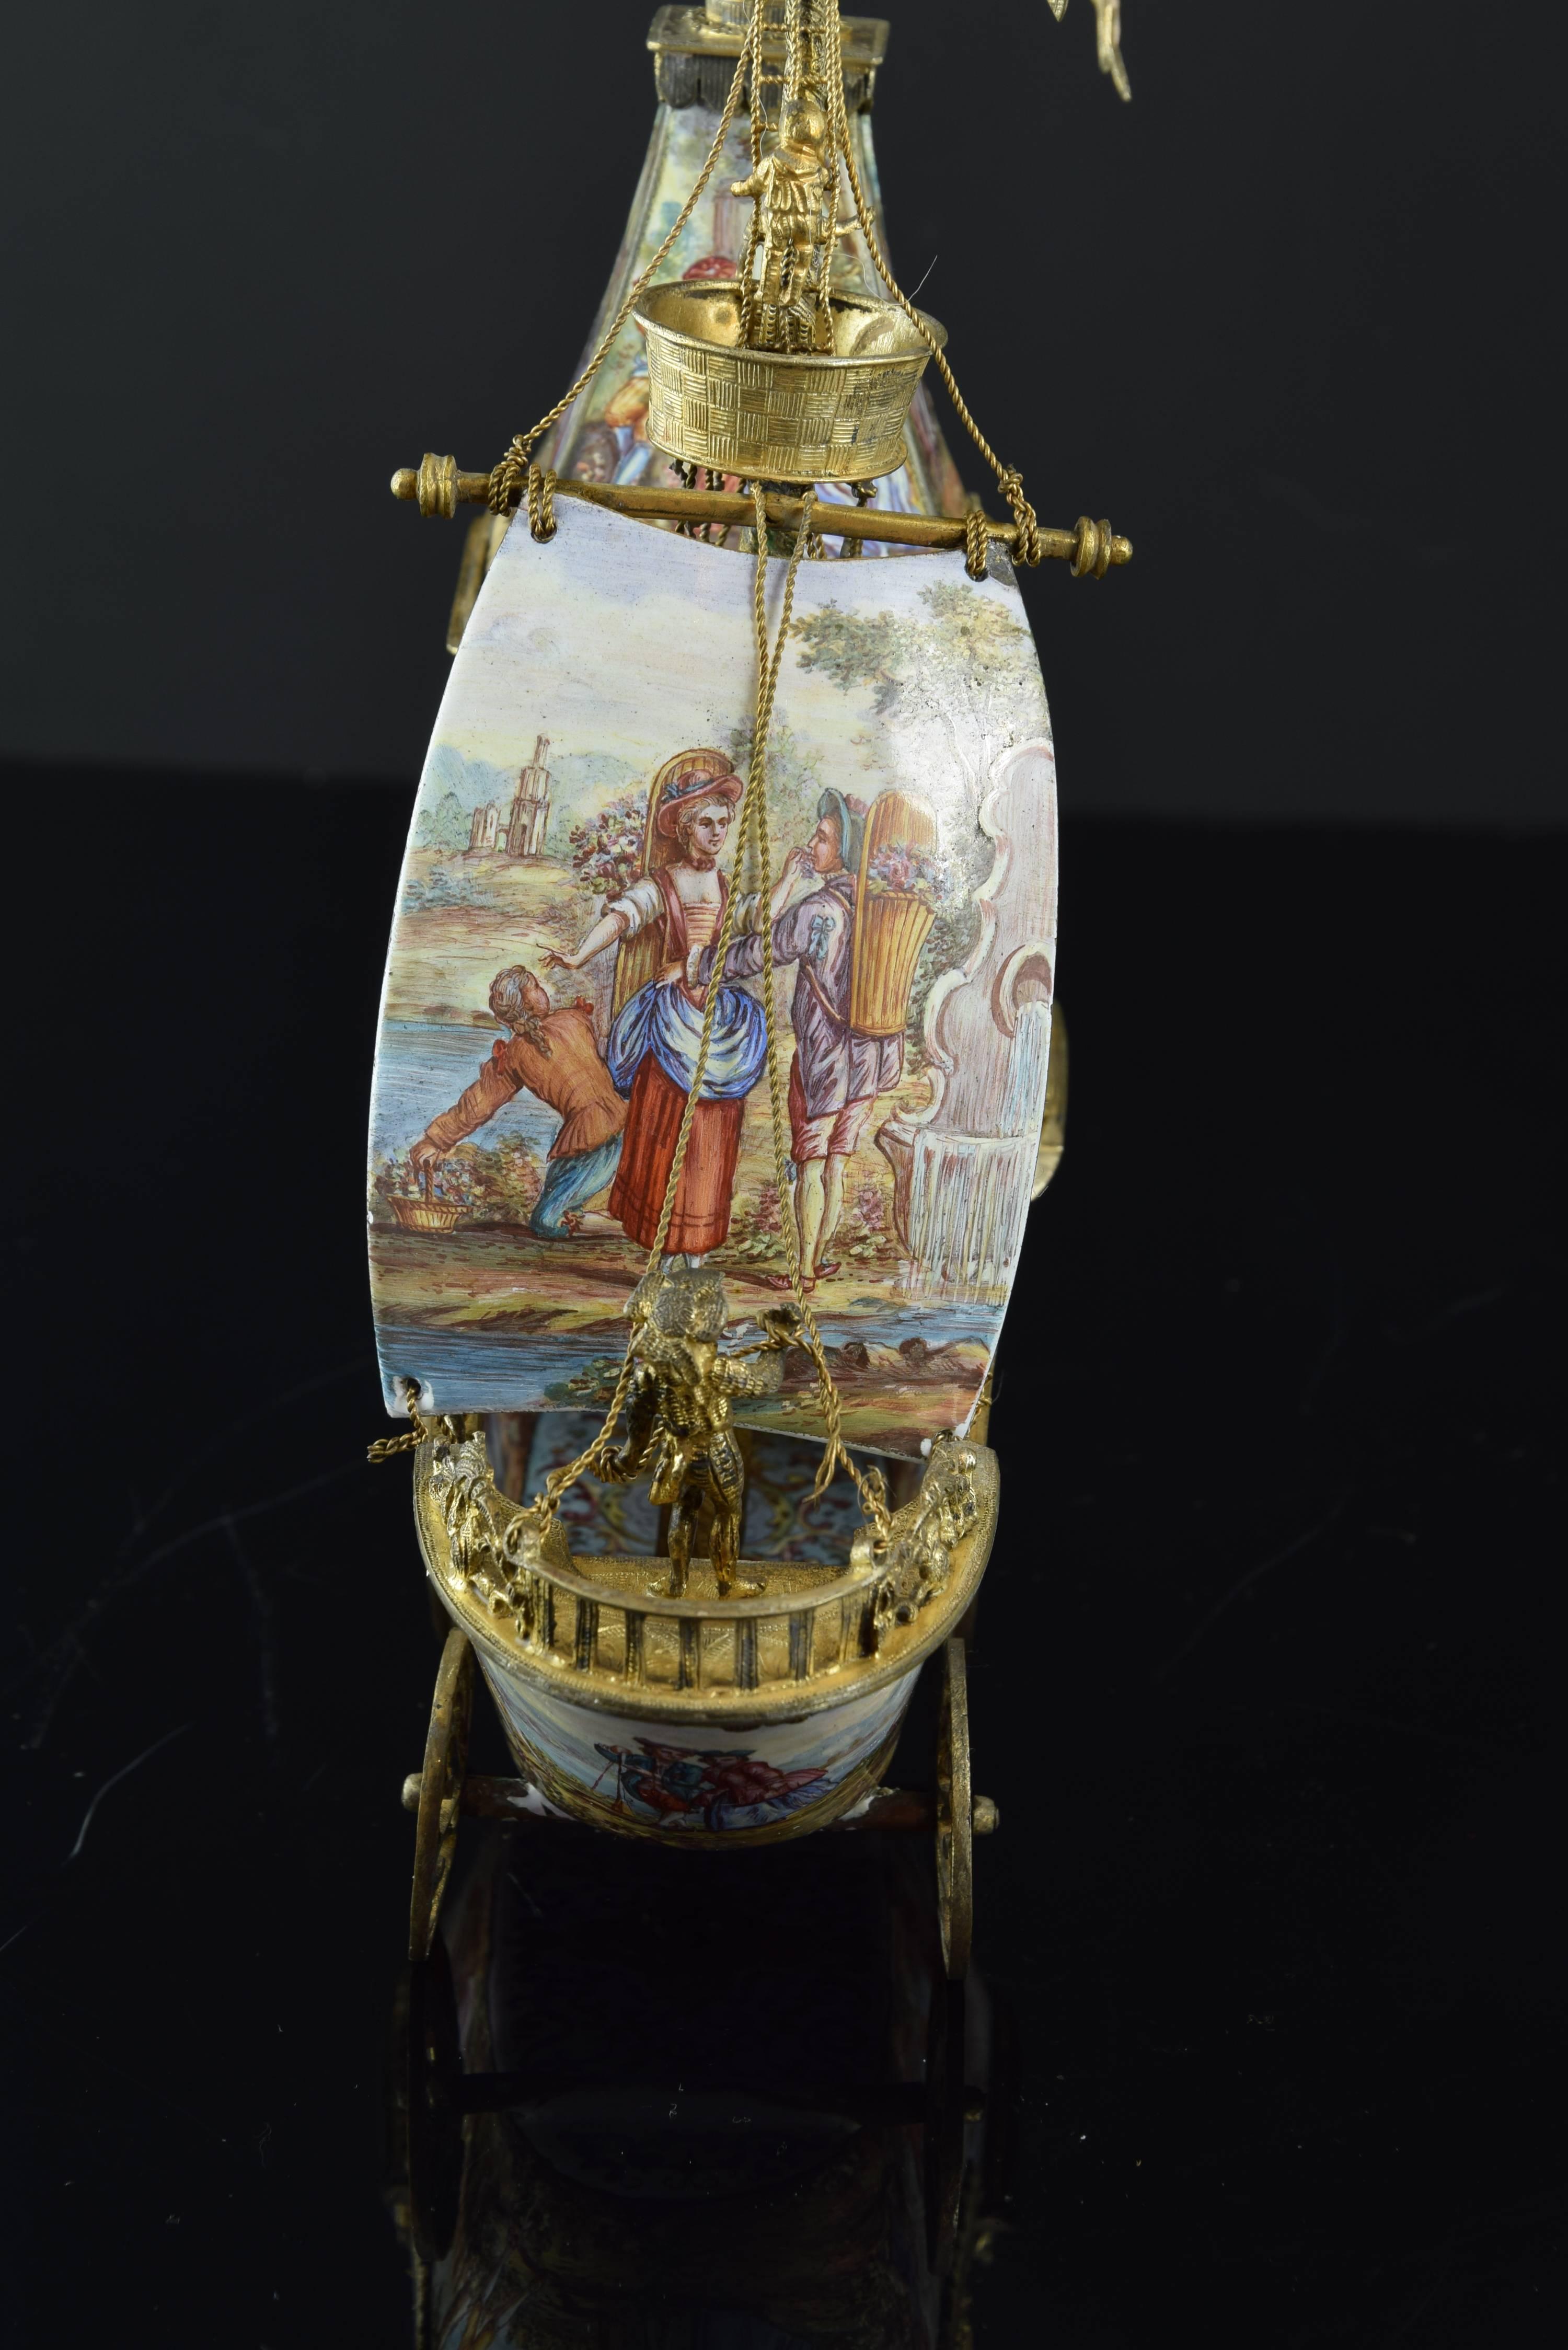 Neoclassical Viennese Enameled Boat, Gilt Silver and Enamel, 19th Century